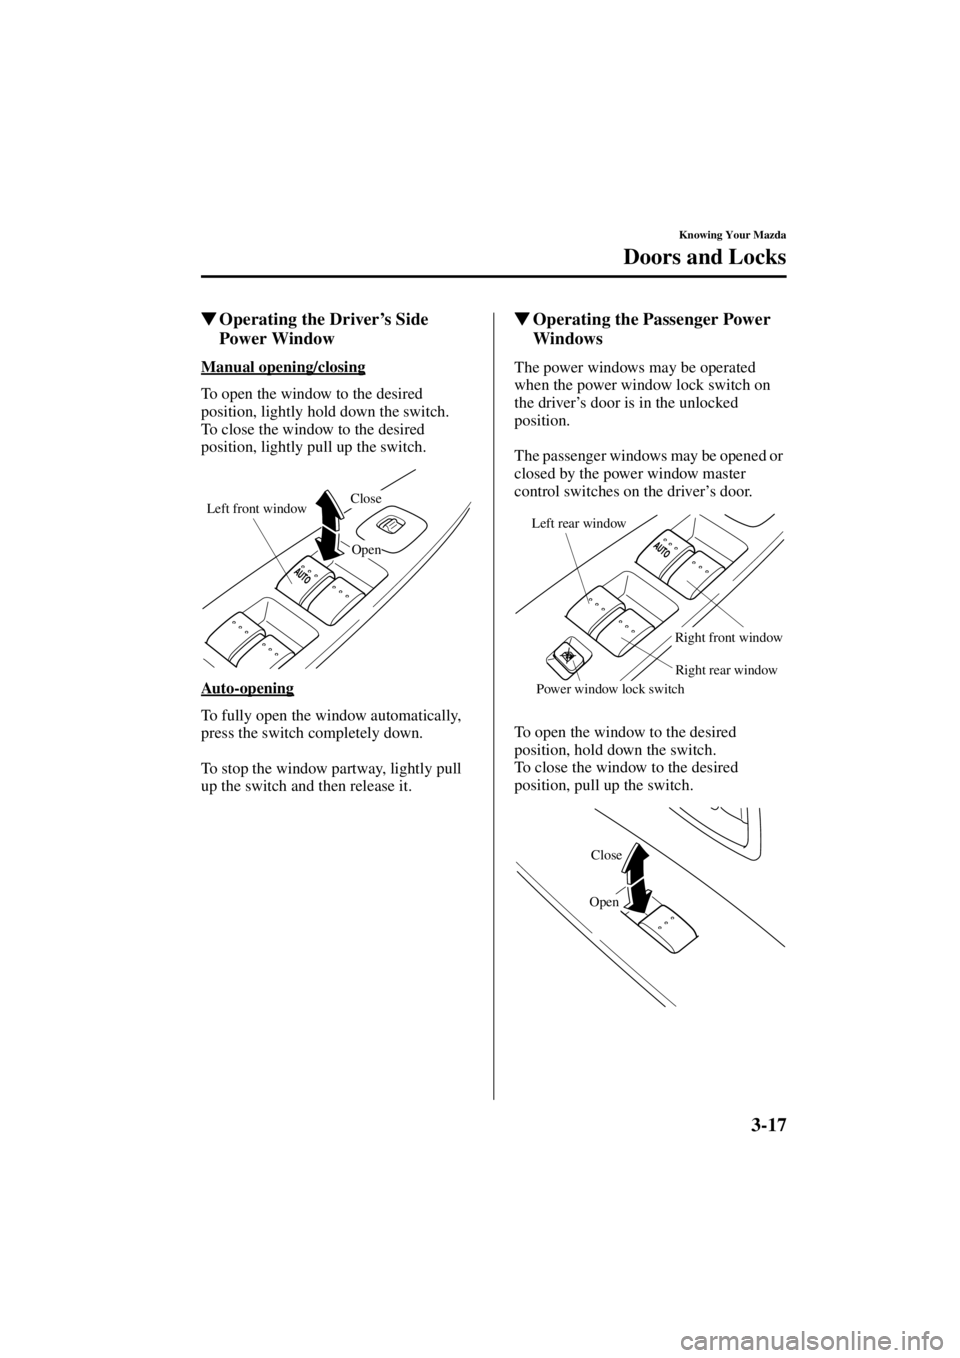 MAZDA MODEL 3 4-DOOR 2004 Owners Guide 3-17
Knowing Your Mazda
Doors and Locks
Form No. 8S18-EA-03I
Operating the Driver
’s Side 
Power Window
Manual opening/closing
To open the window to the desired 
position, lightly hold down the swi